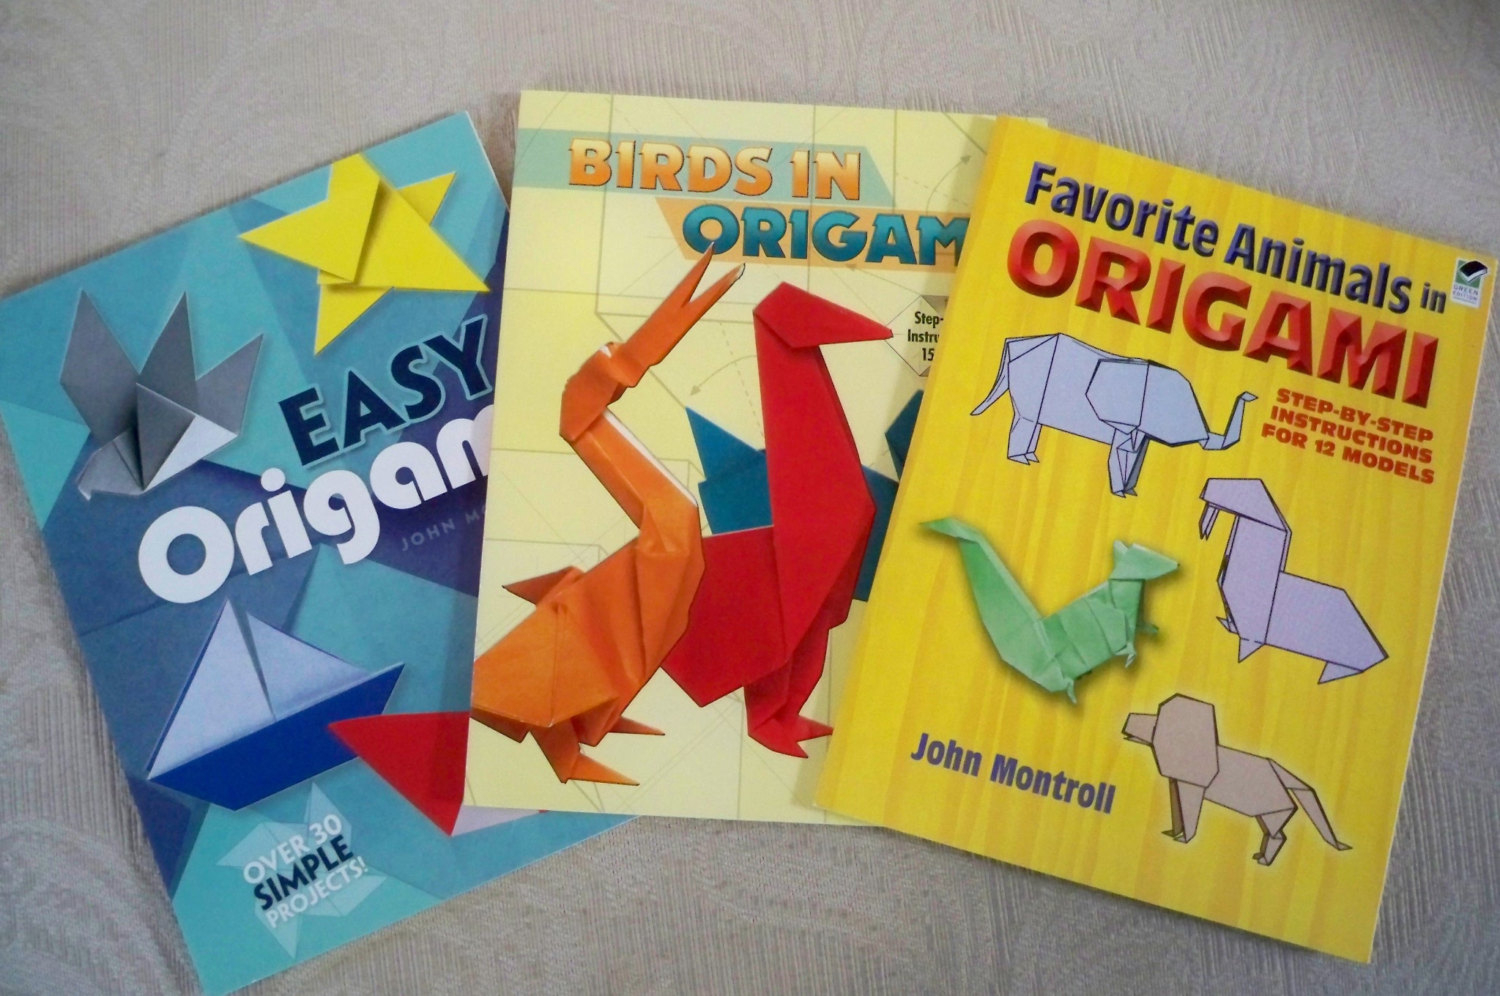 How To Make An Origami Booklet Vintage Book Craft Book Origami Pattern Booklets 3 Easy Origami Birds Animals Origami